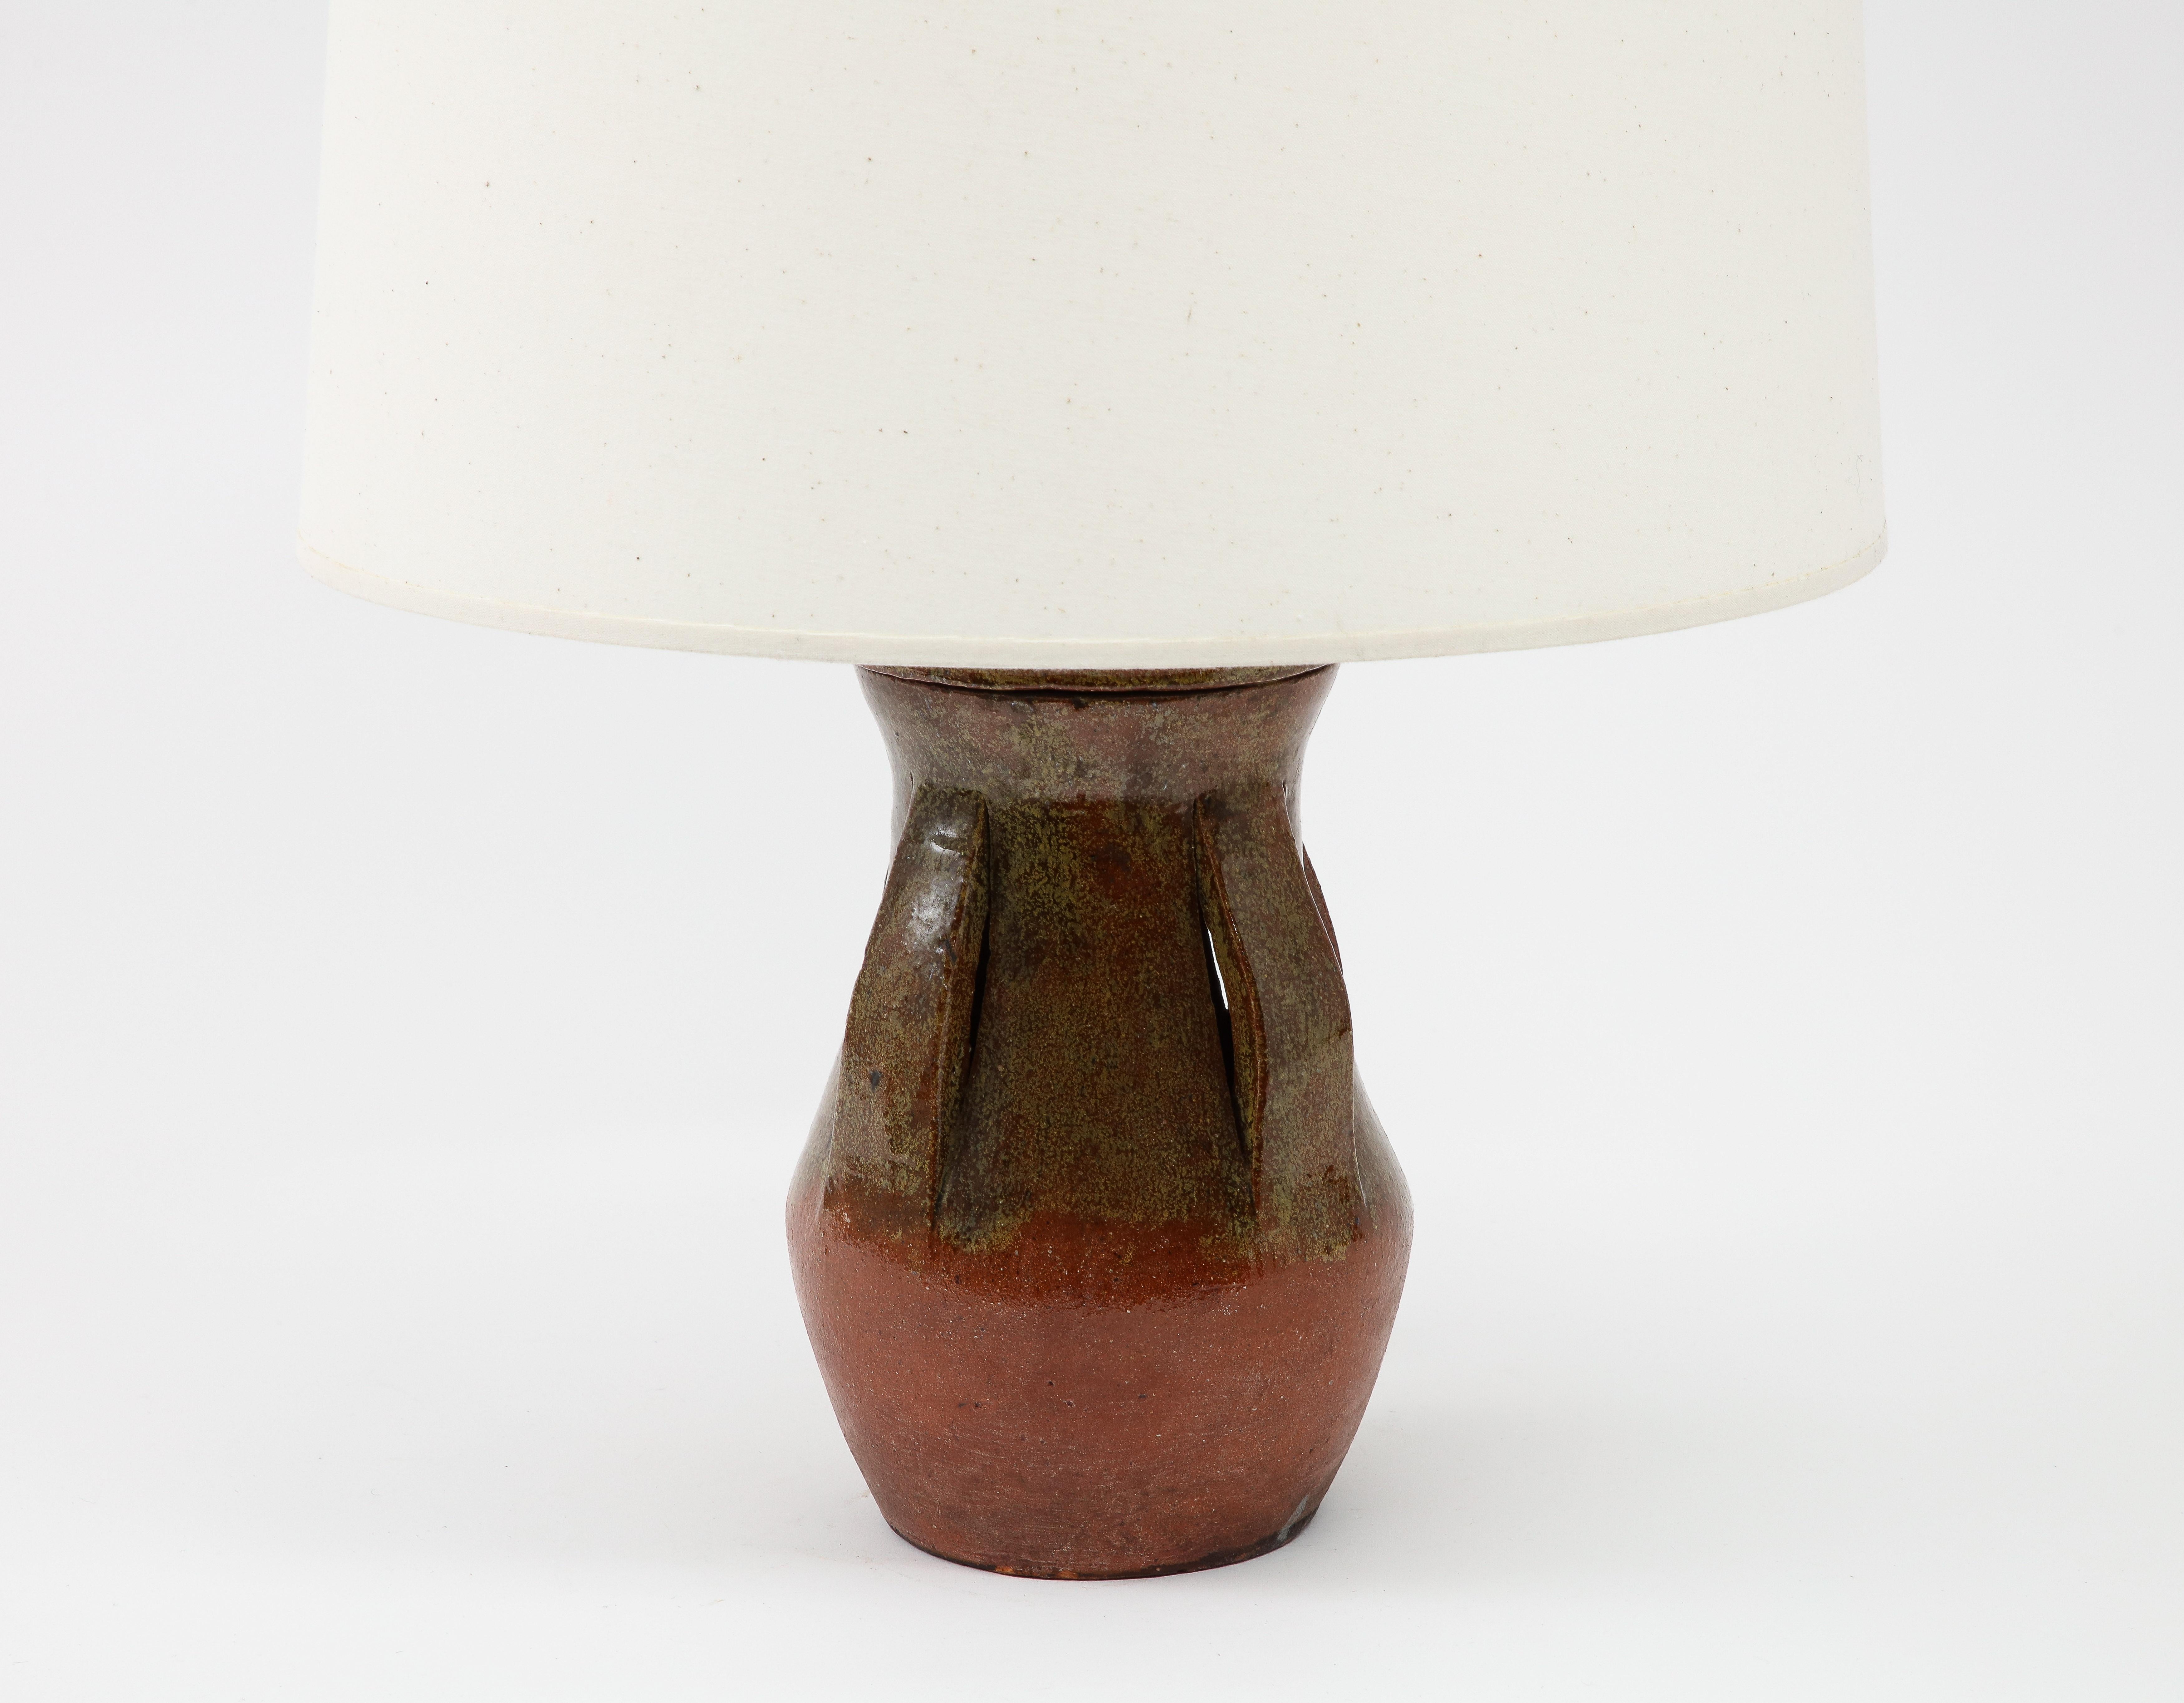 Circular ceramic table lamp in earthen tones glaze with ribbon decor. Rewired with keyed socked and silk cord. Base only 13